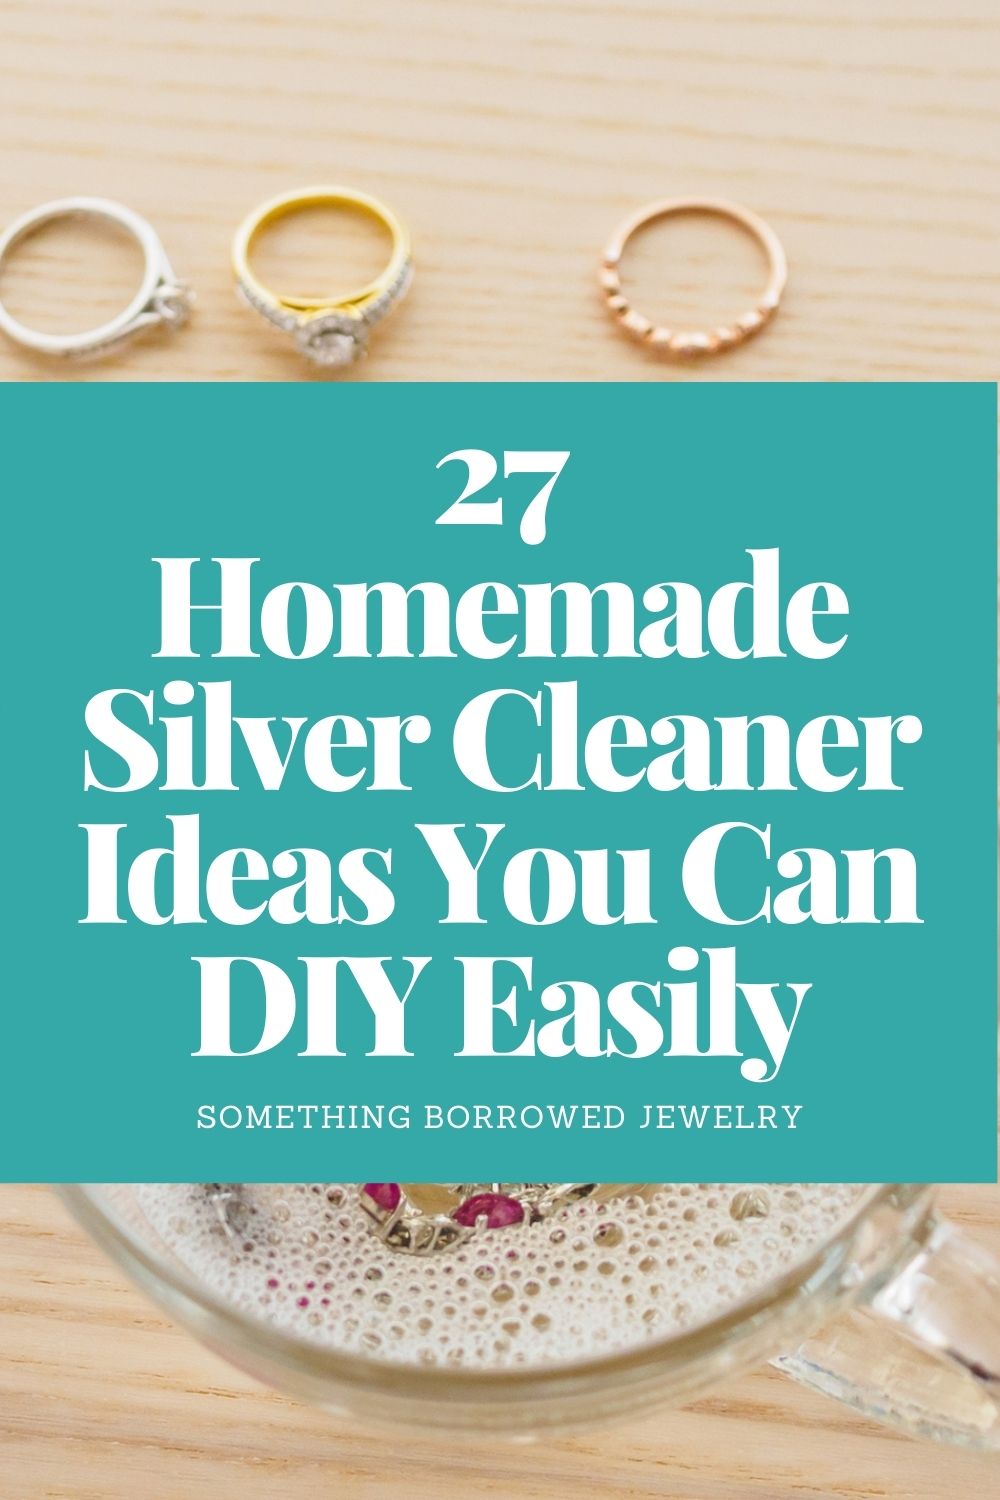 27 Homemade Silver Cleaner Ideas You Can DIY Easily pin